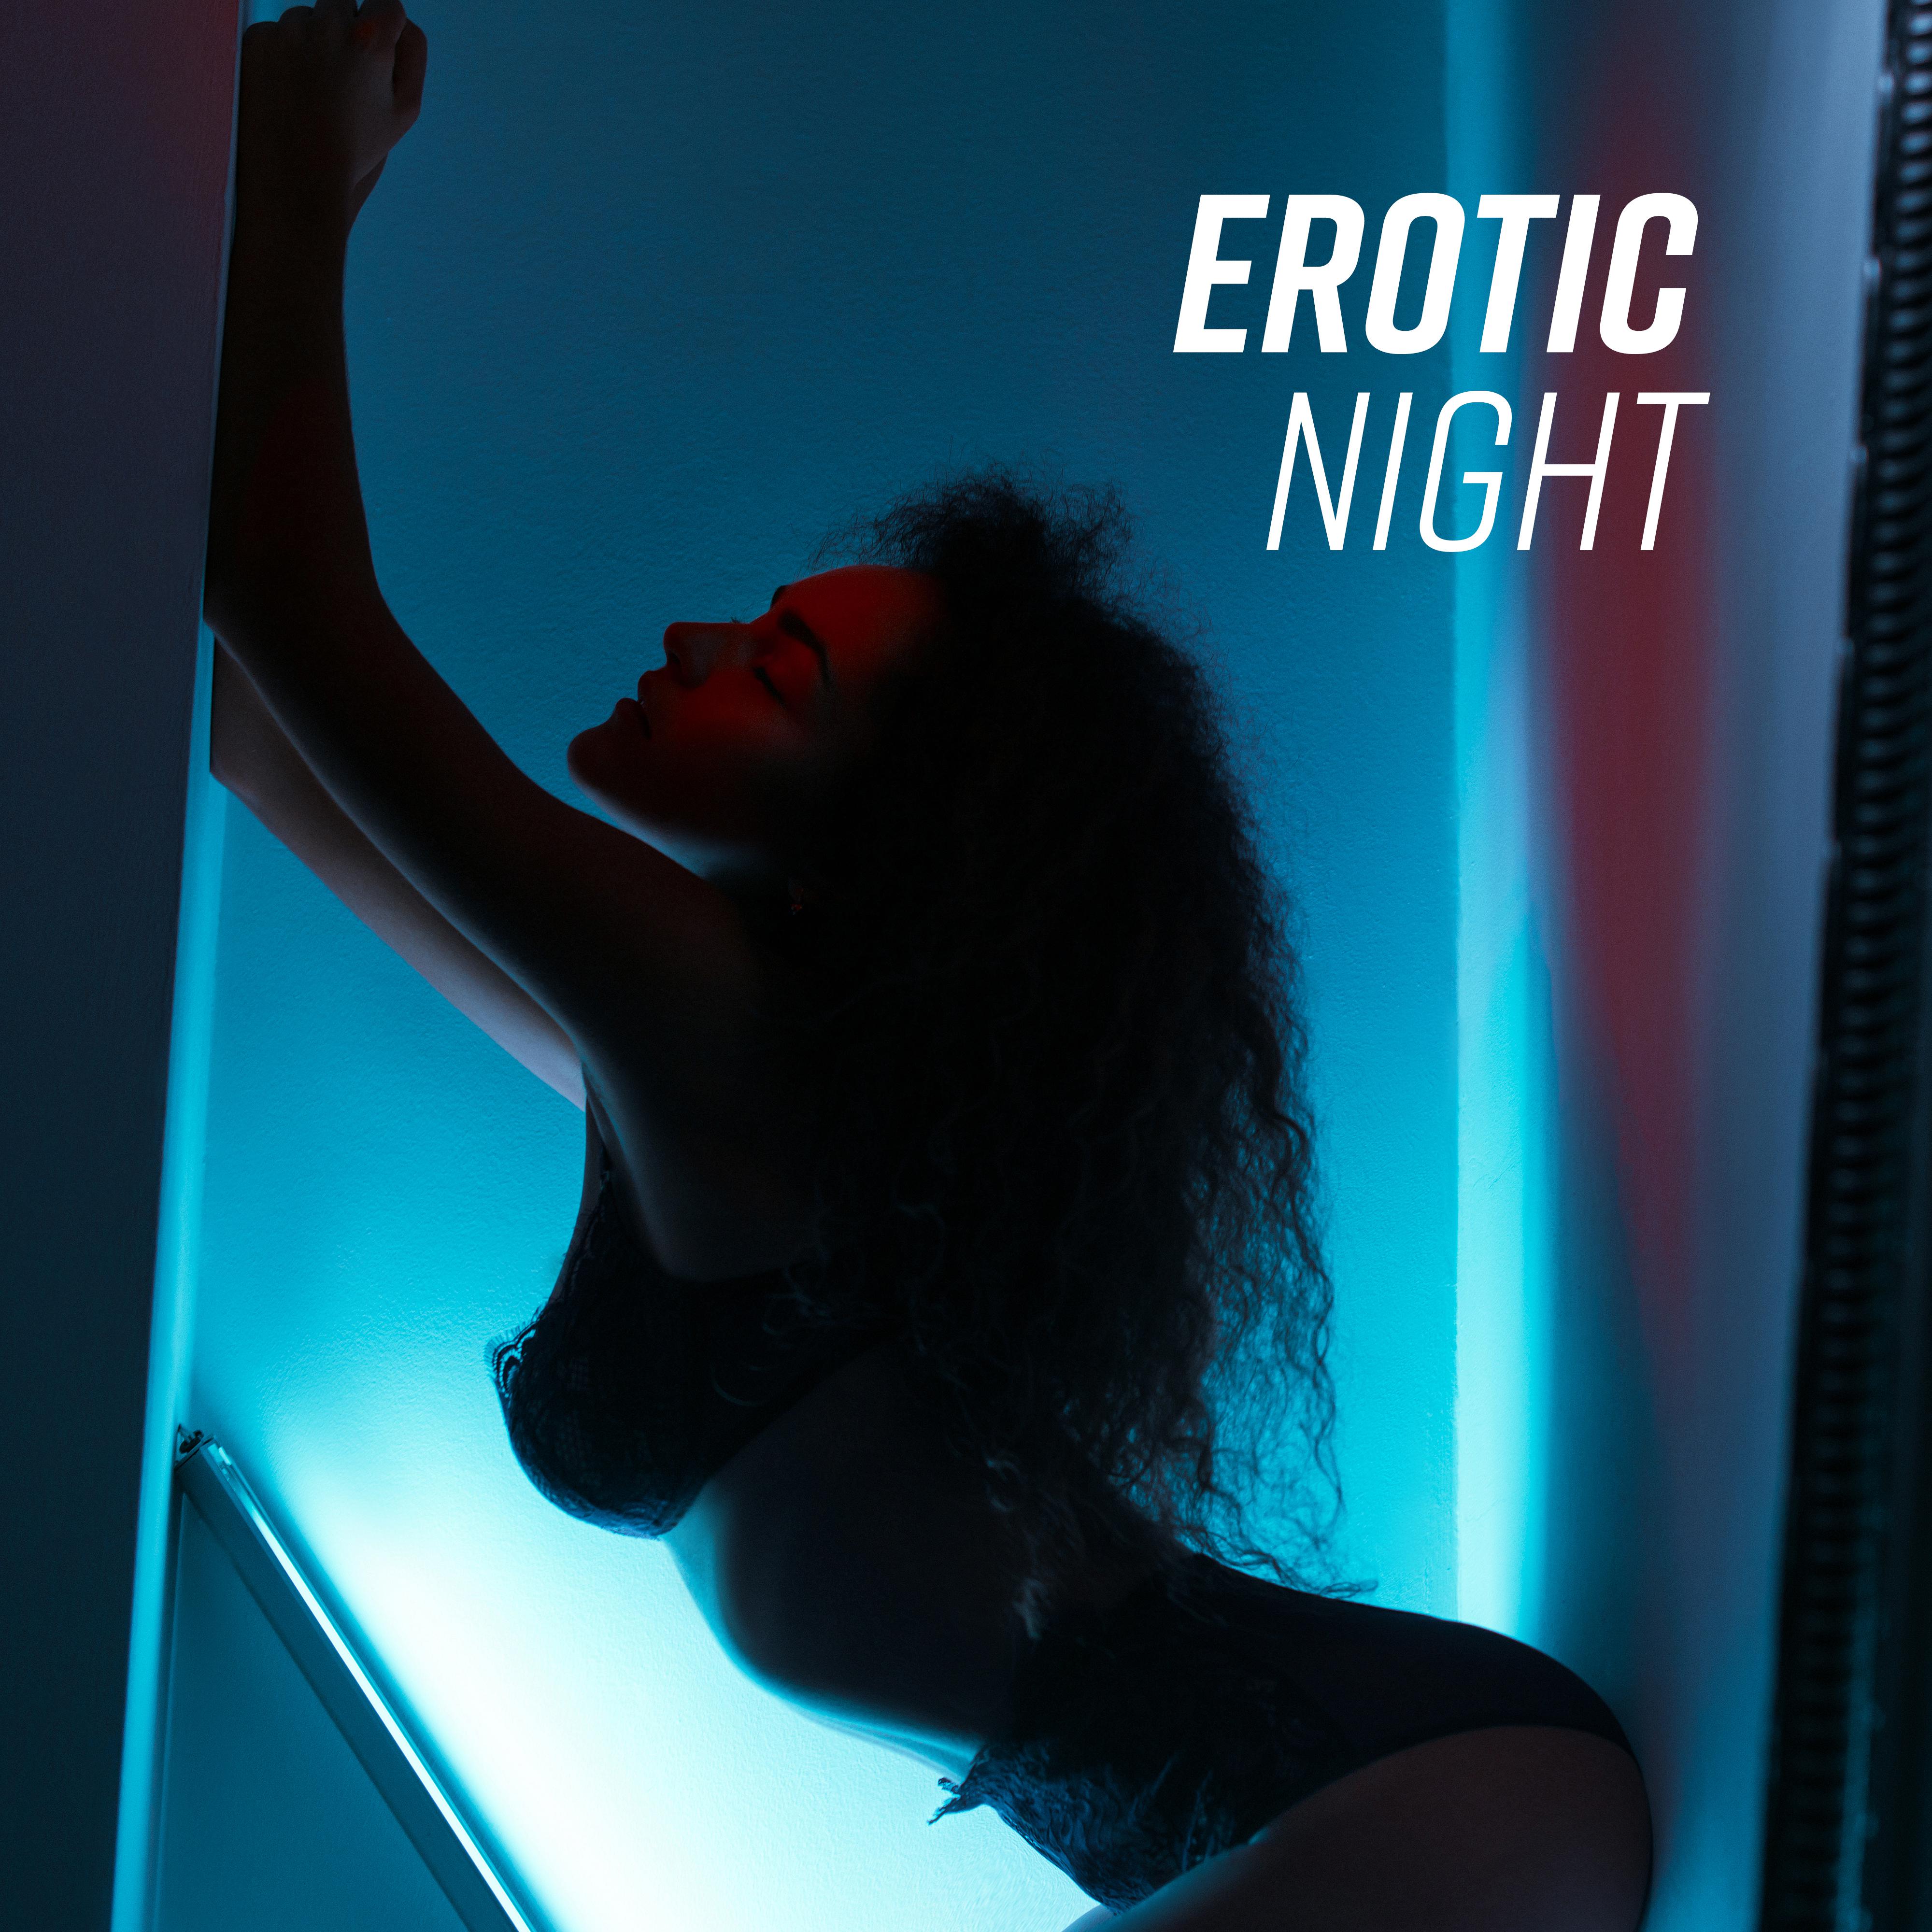 Erotic Night – Sex Music for Making Love, Chillout 69, Sensual Music, Relaxing Vibes, Erotic Chill Out, Zen